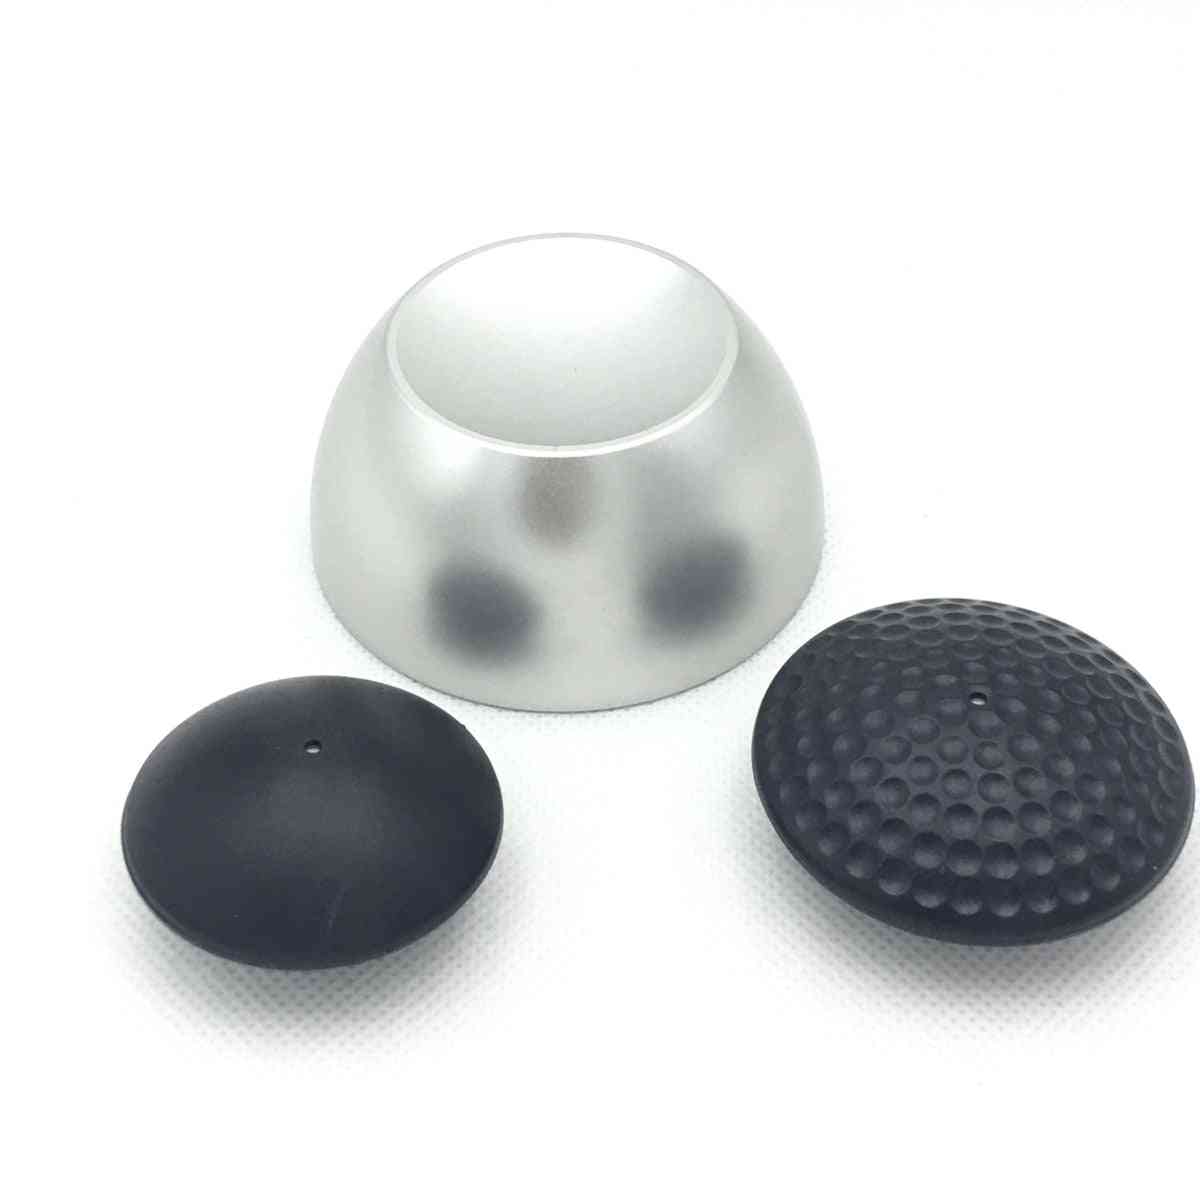 Magnetic Security Tag Detacher Anti Shoplifting Device